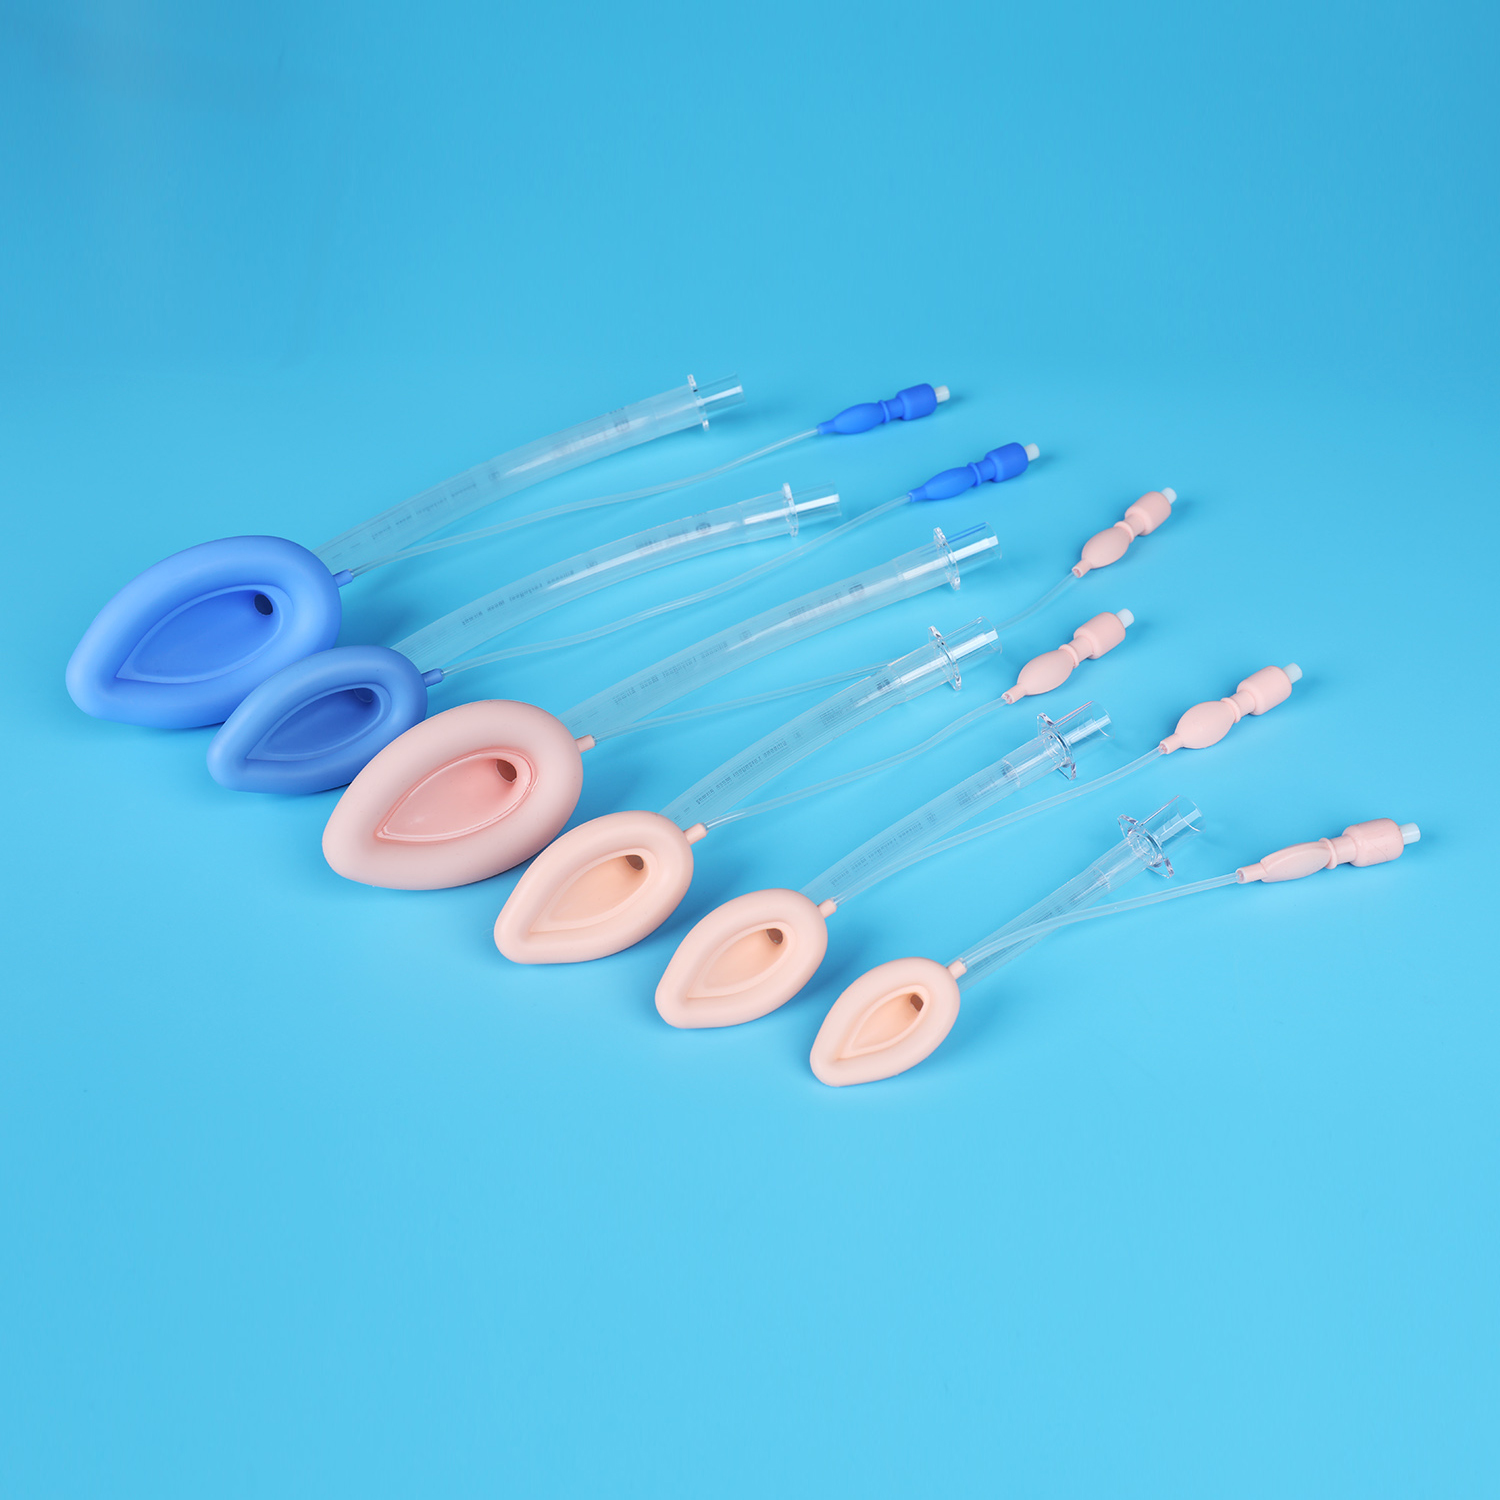 Airway Laryngeal Mask Silicone Single Use Factory Sterile